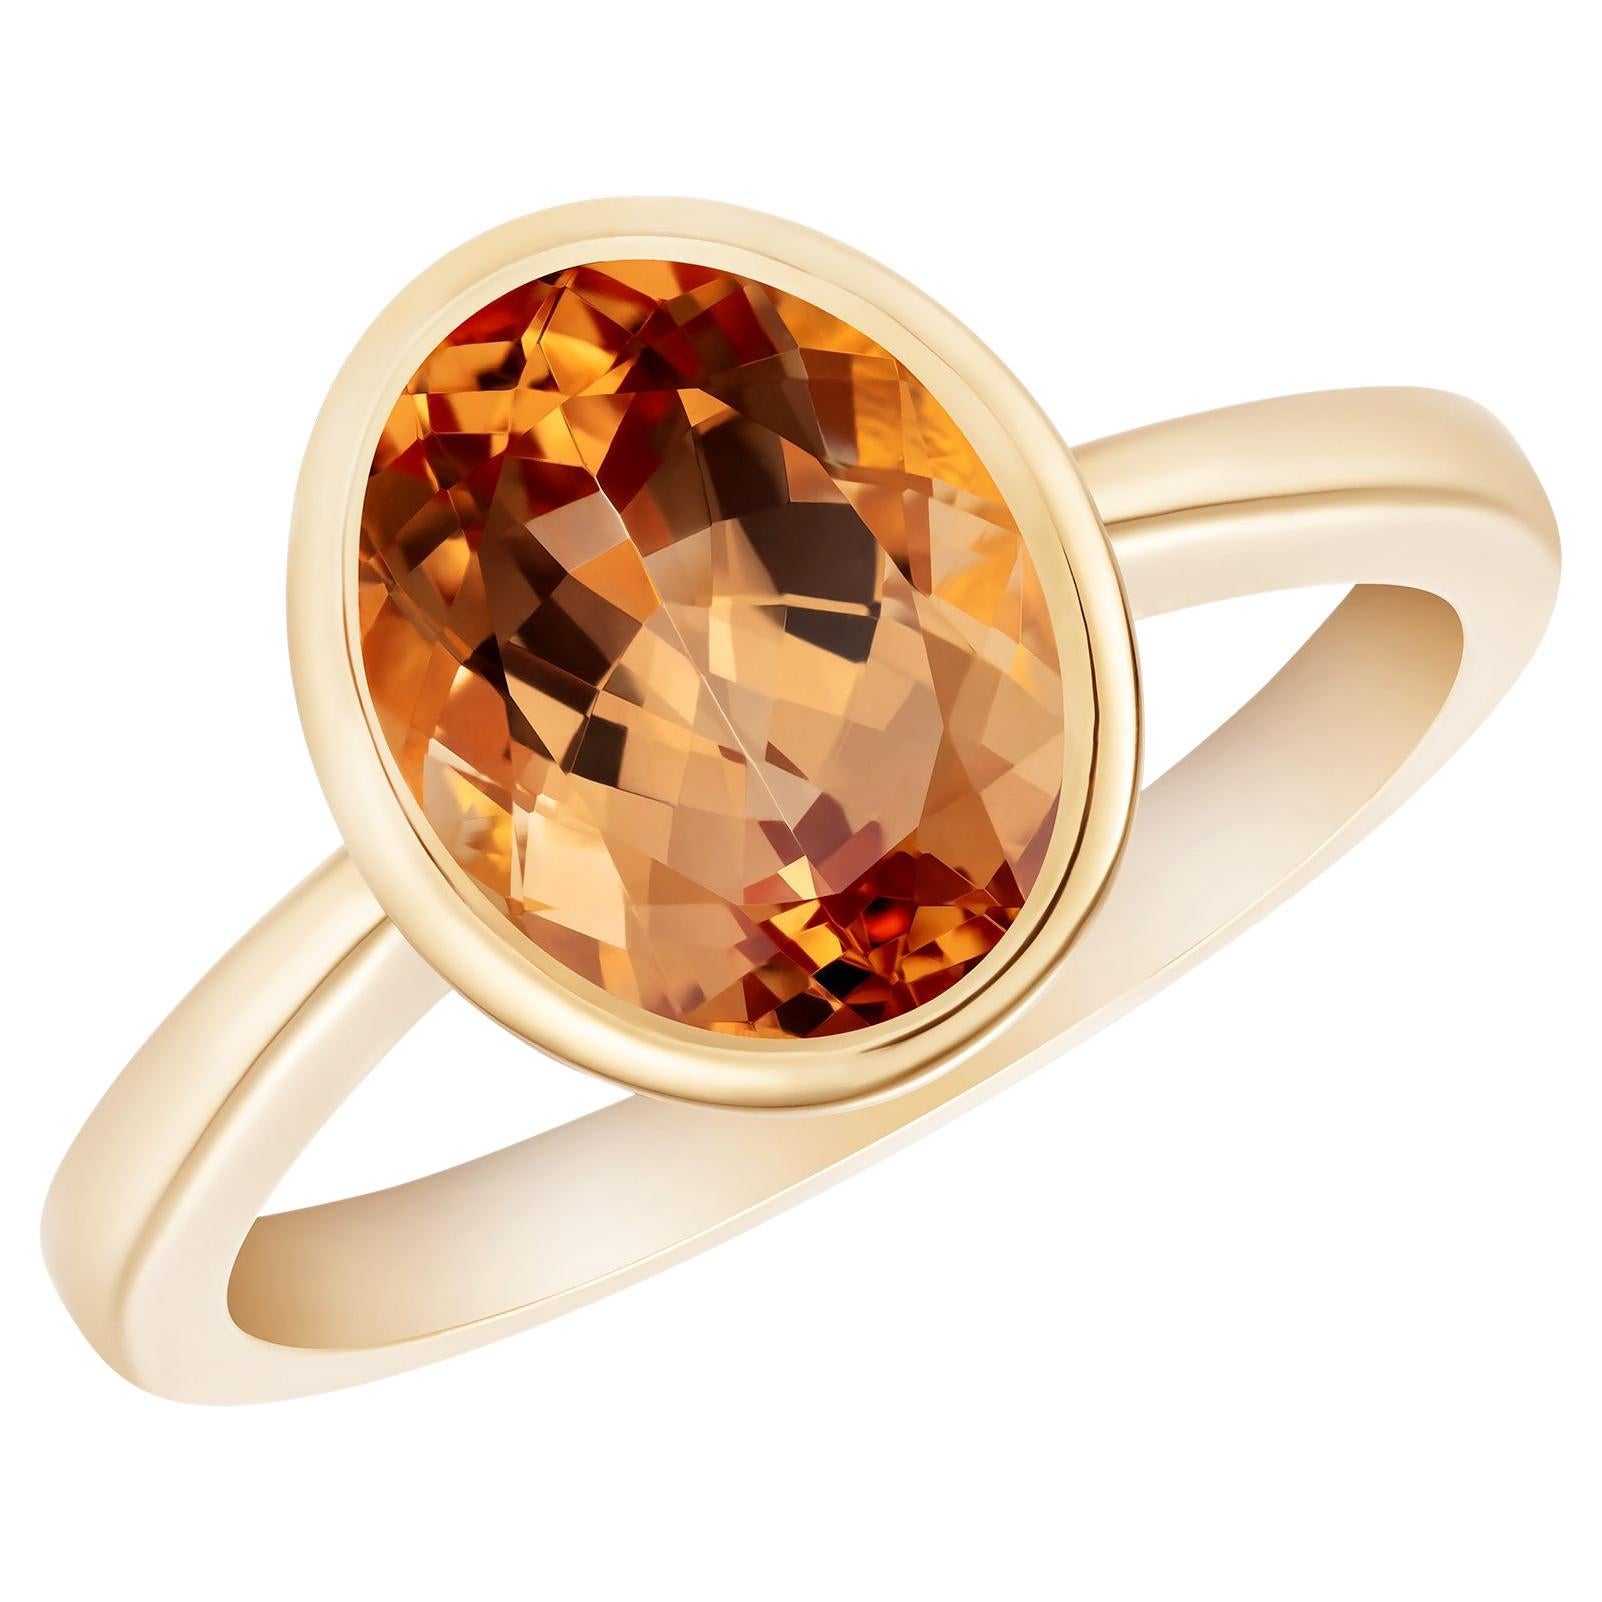 What is imperial topaz?